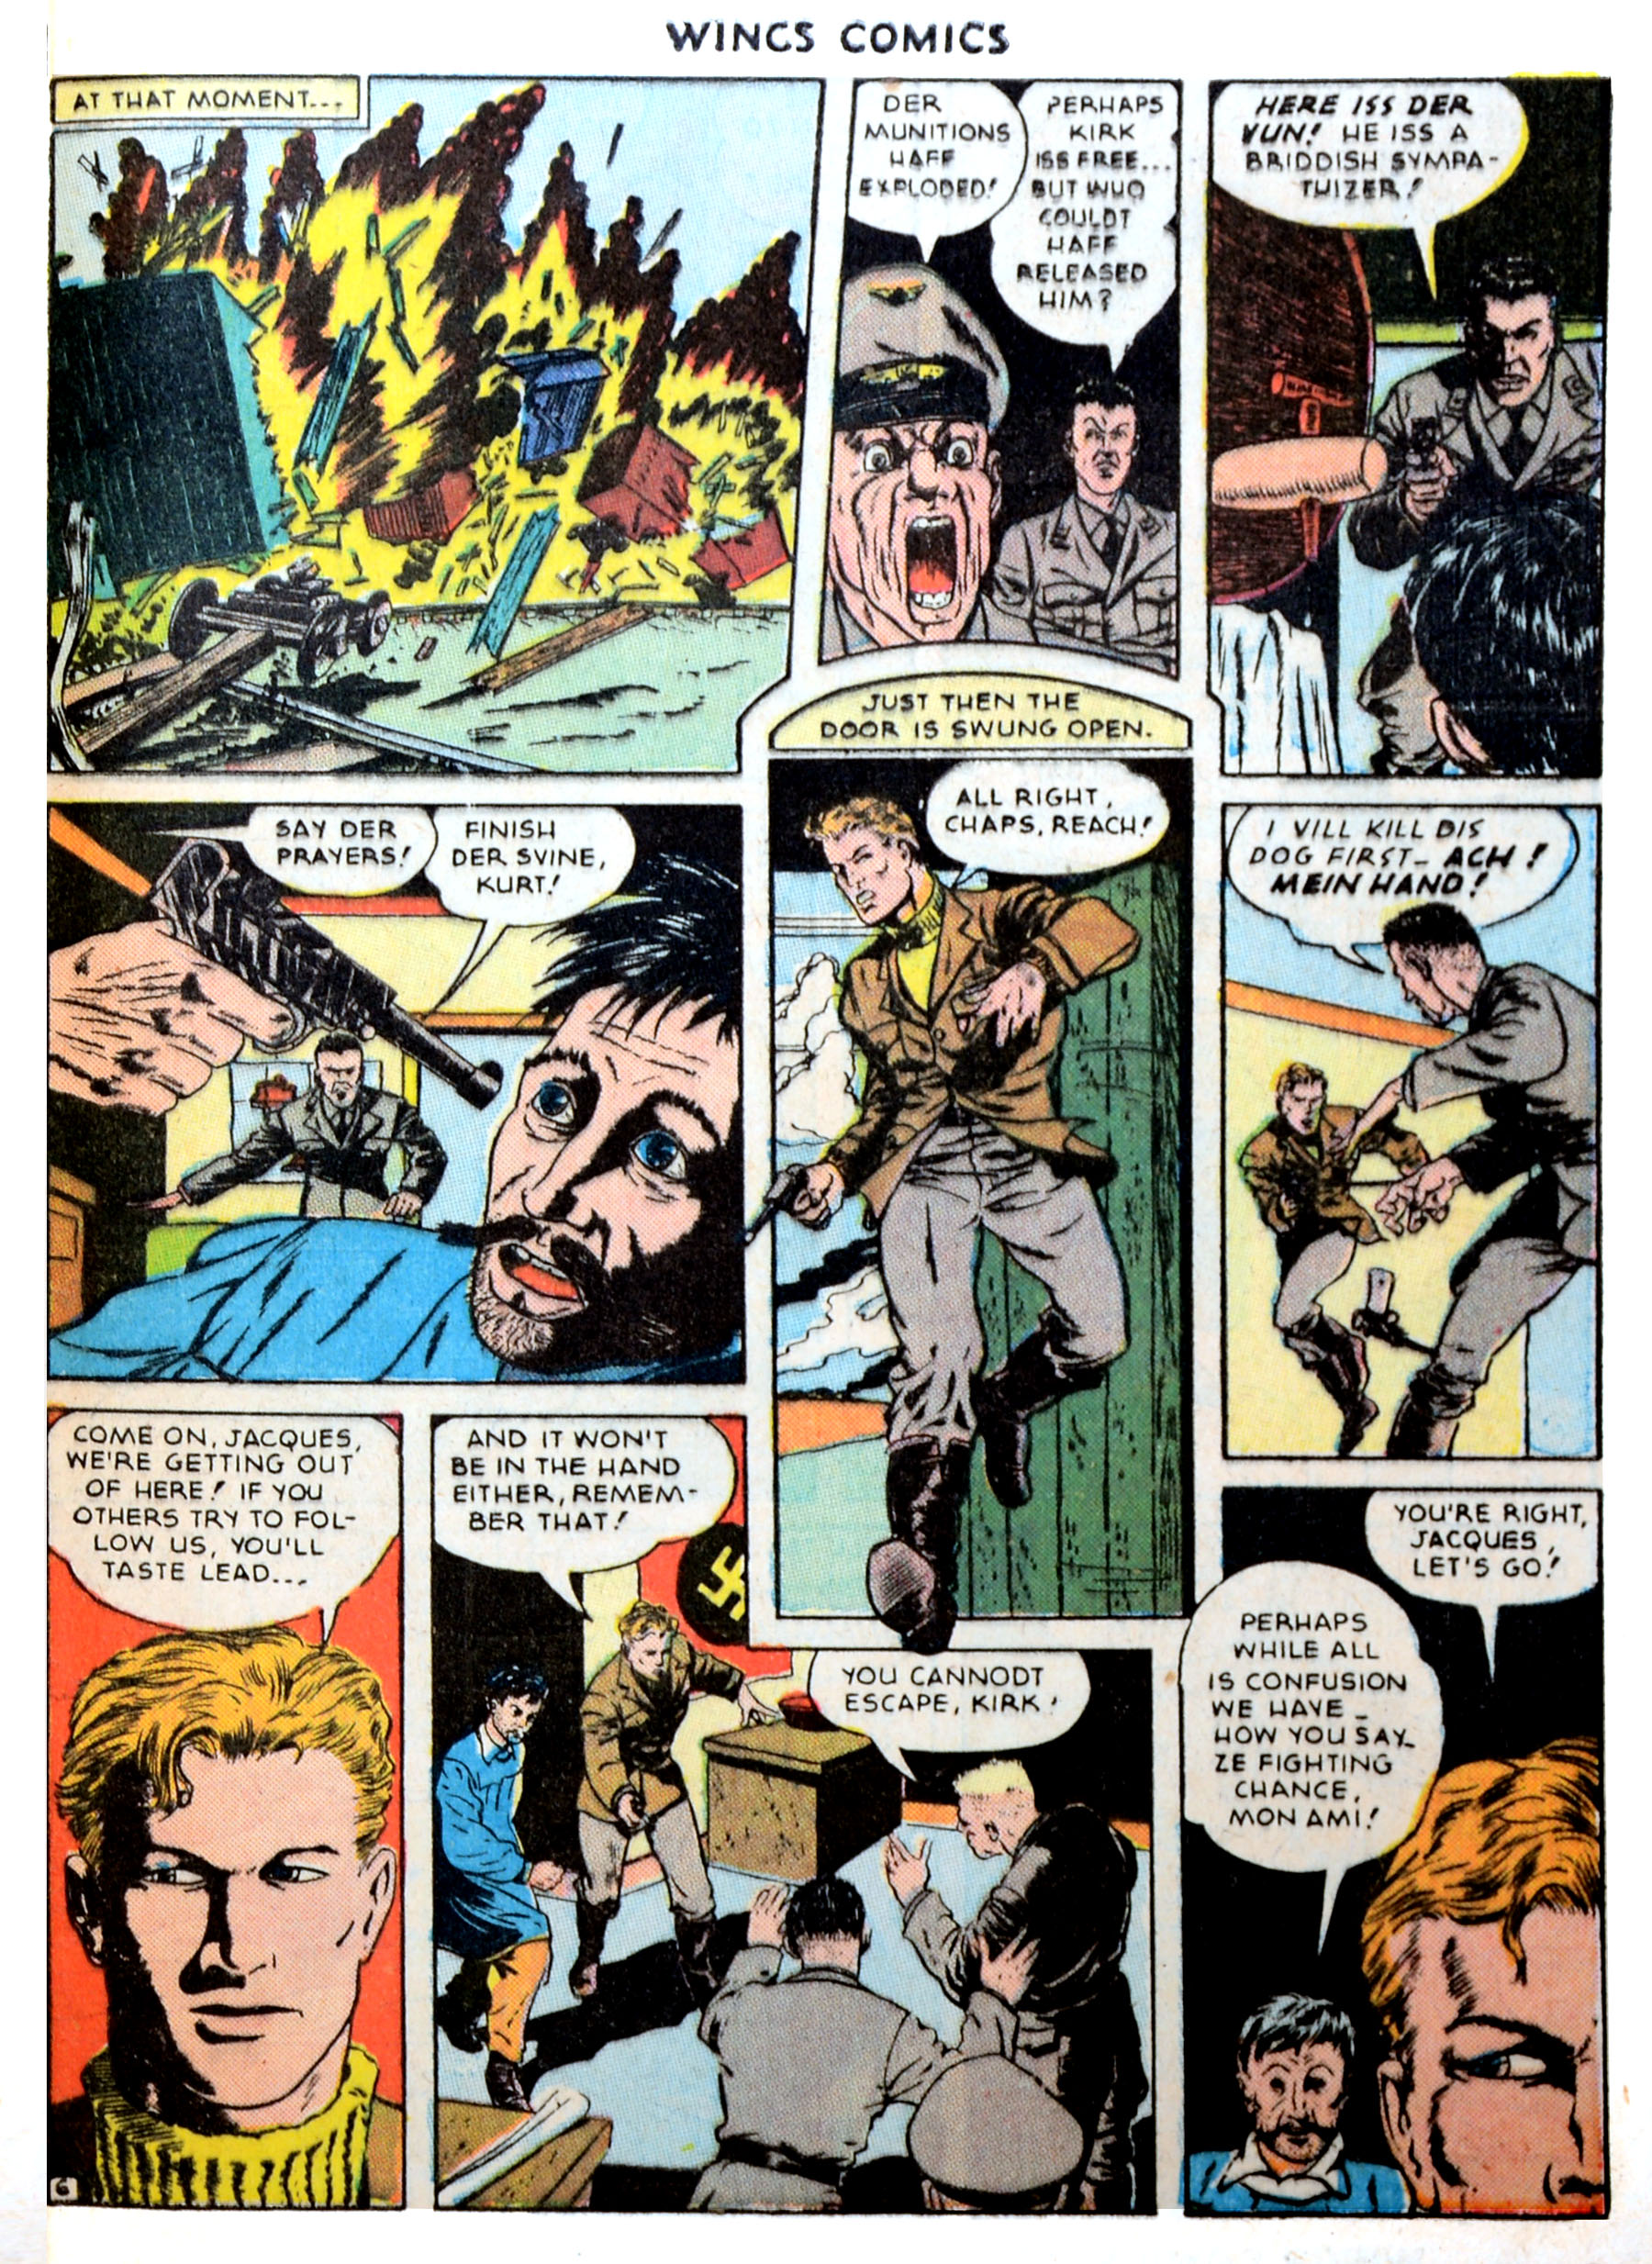 Read online Wings Comics comic -  Issue #47 - 48